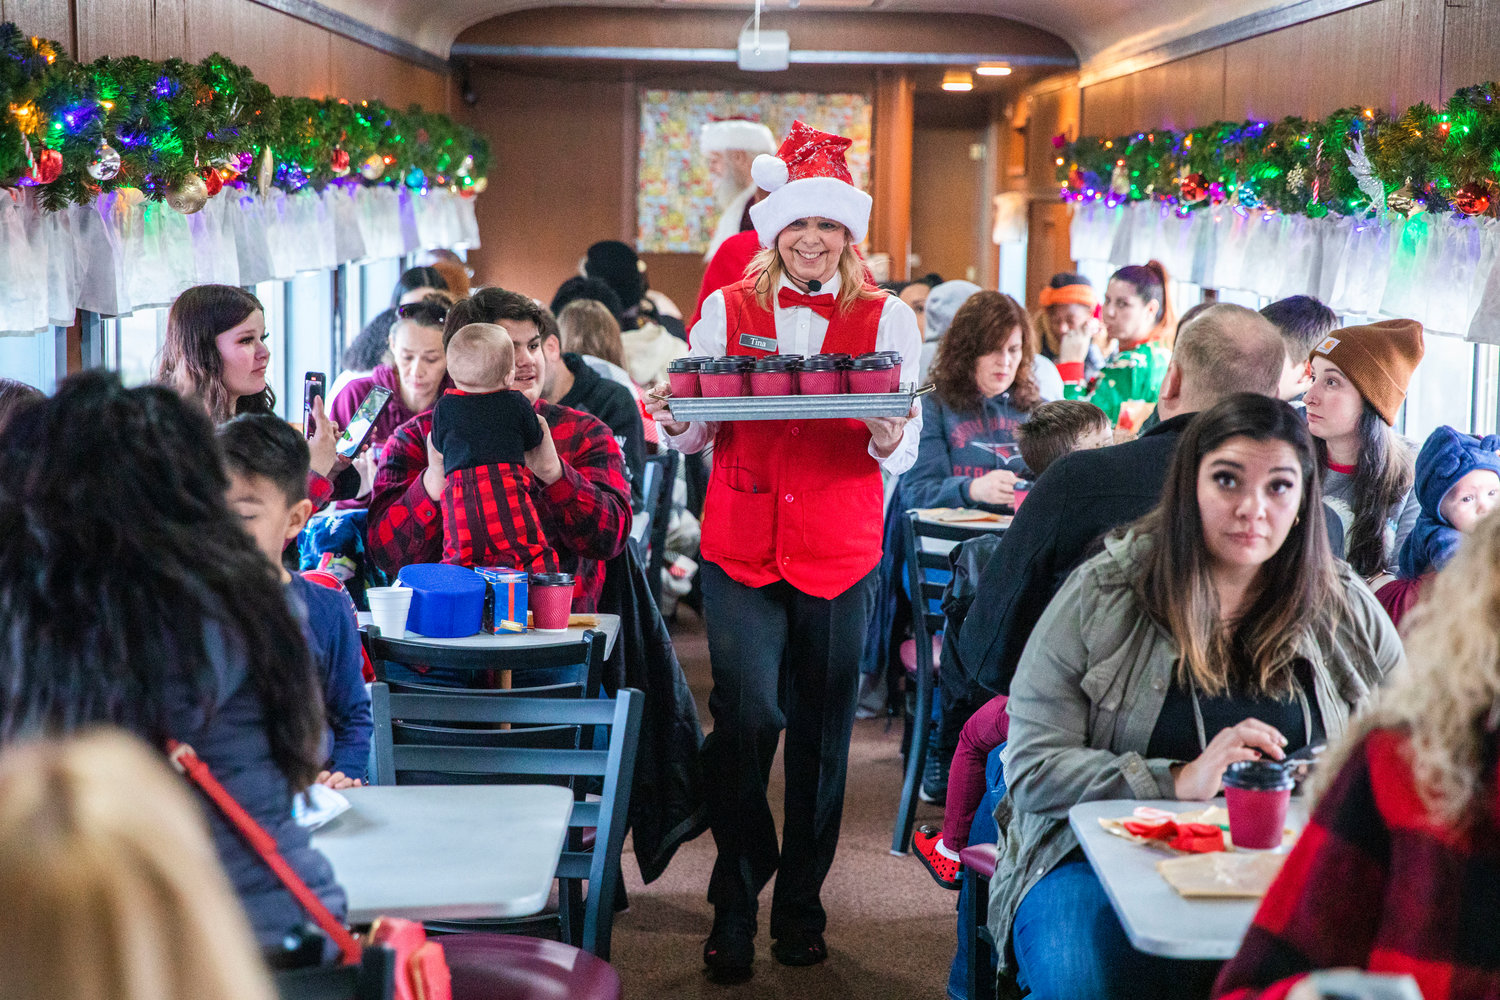 Hot cocoa is served with a smile as Santa visits passengers at the Steam Train Depot in Chehalis on Saturday.